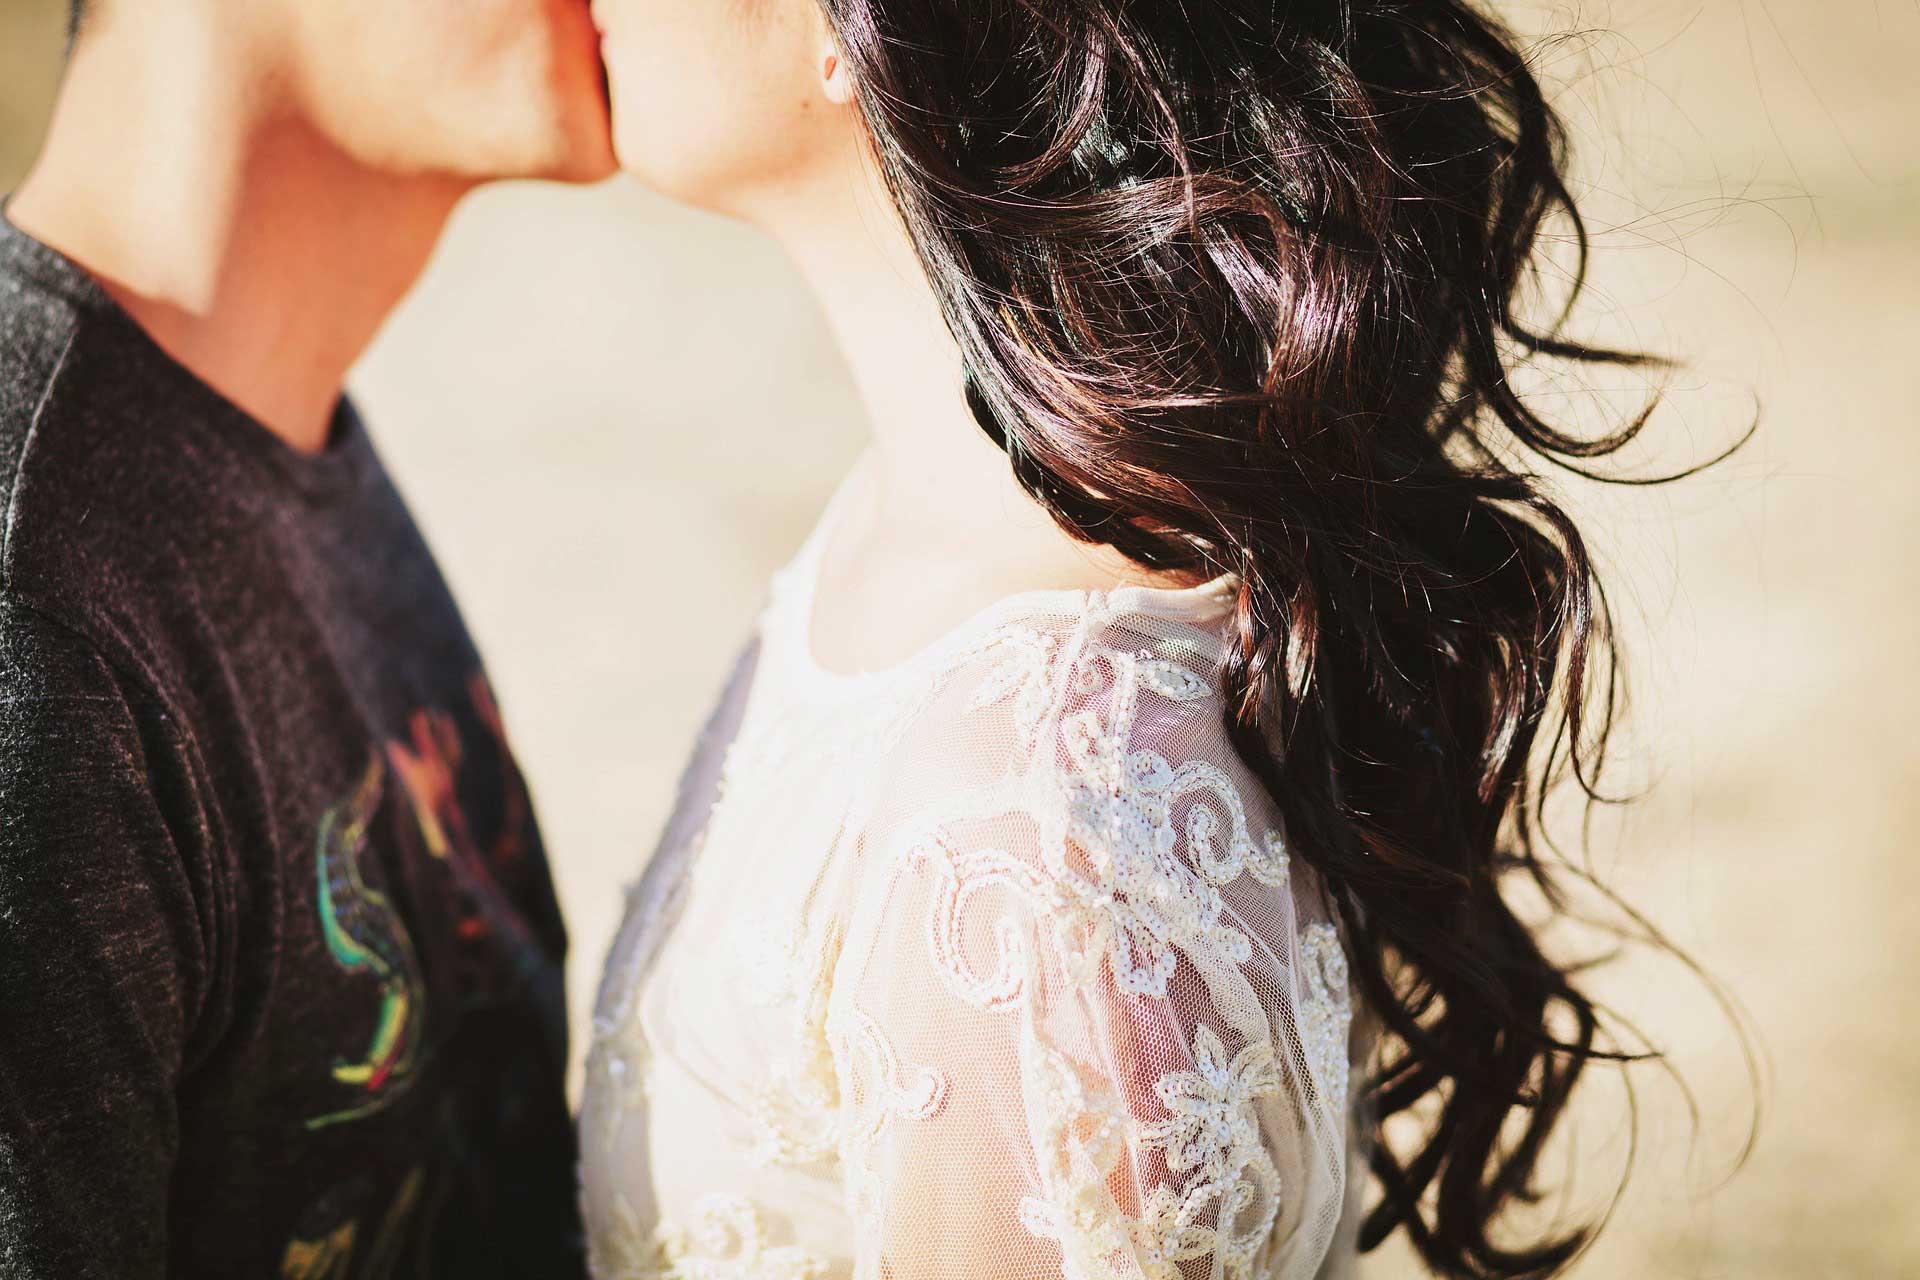 Kissing Picture Of love Couple. HD Kissing Wallpaper of Couples